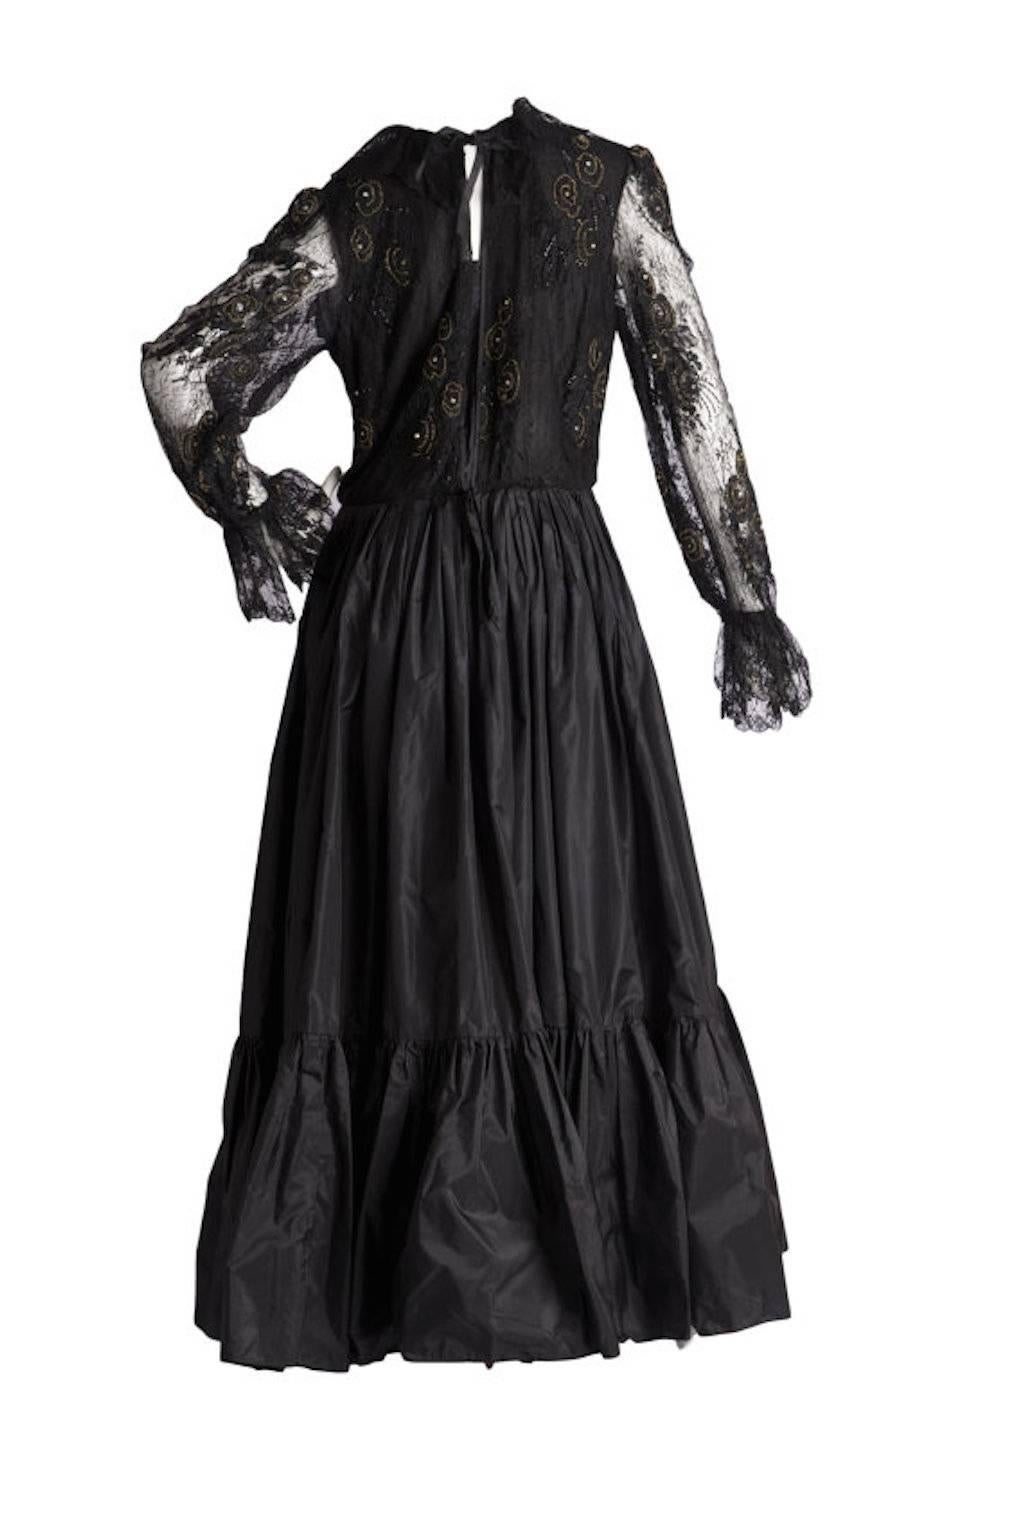 Paul-Louis Orrier Couture Vintage Dress. With lace long sleeve top with sequins and beads lined with silk, has back hook/eye entry to the bodice, skirt is constructed of a silk layer and taffeta over skirt. Skirt has zip and hook/eye entry.

Size